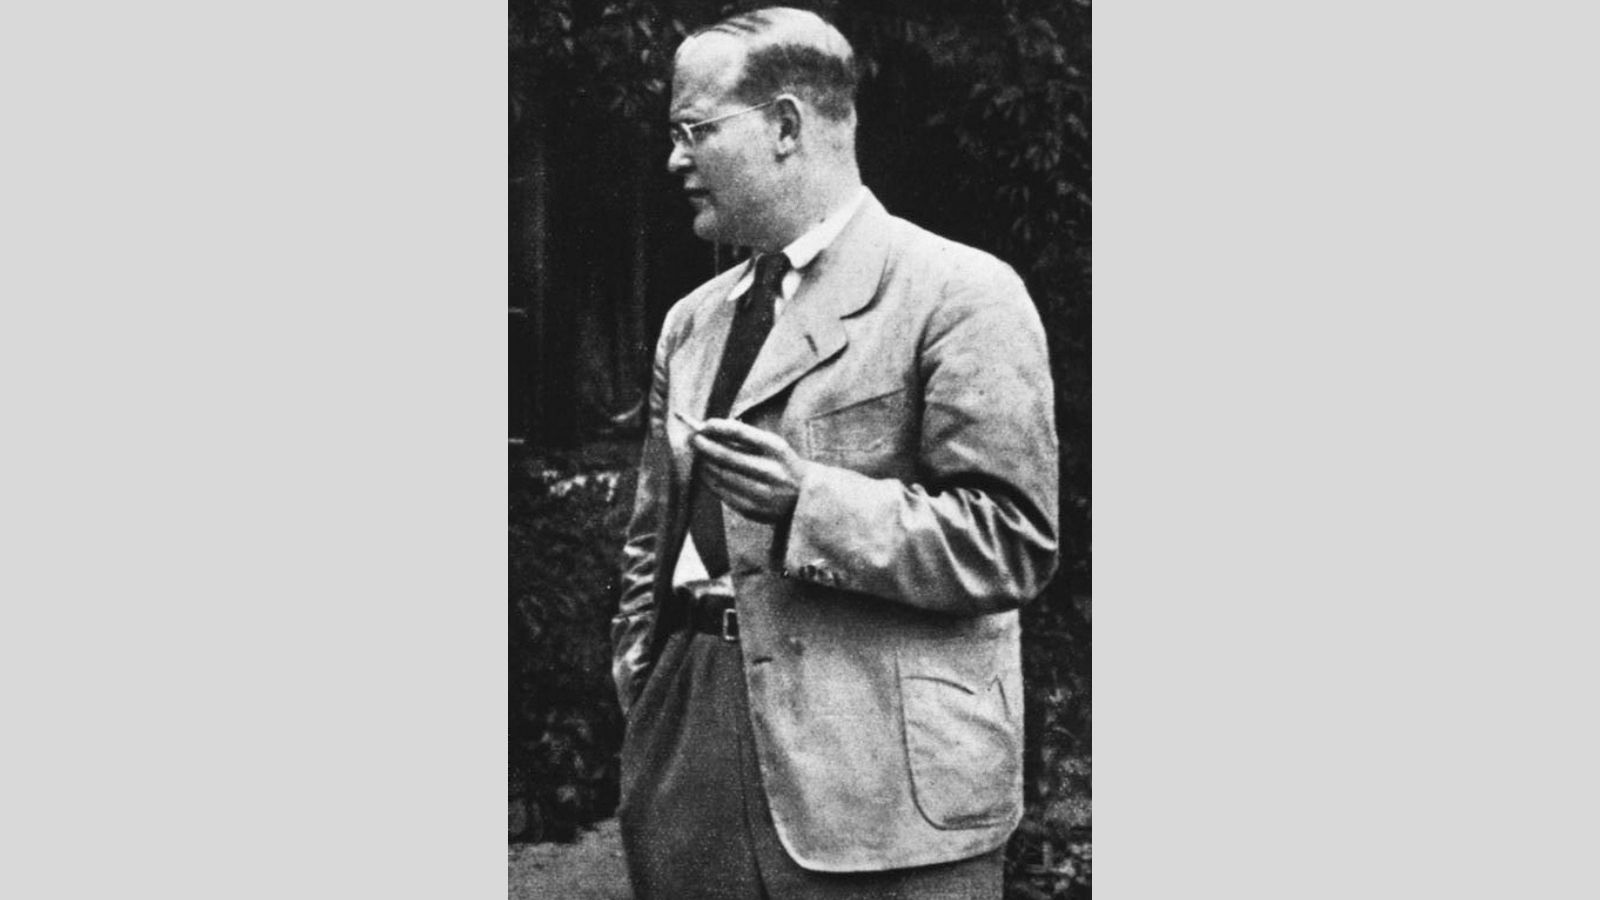 <p>Dietrich Bonhoeffer, a courageous Lutheran pastor and staunch opponent of the Nazi regime, played a pivotal role in founding the Confessing Church, a bold resistance movement against Hitler’s efforts to co-opt Protestantism. Released amidst Hitler’s reign in 1937, “The Cost of Discipleship” proved prophetic, ultimately sealing Bonhoeffer’s fate. In a poignant excerpt, he emphasizes the transformative power of “costly grace,” framing it as a divine invitation to follow Jesus and offering solace to the broken-hearted. Bonhoeffer’s thesis on the secularization of Christianity resonates profoundly in today’s tumultuous landscape, offering timeless wisdom for navigating modern challenges.</p>